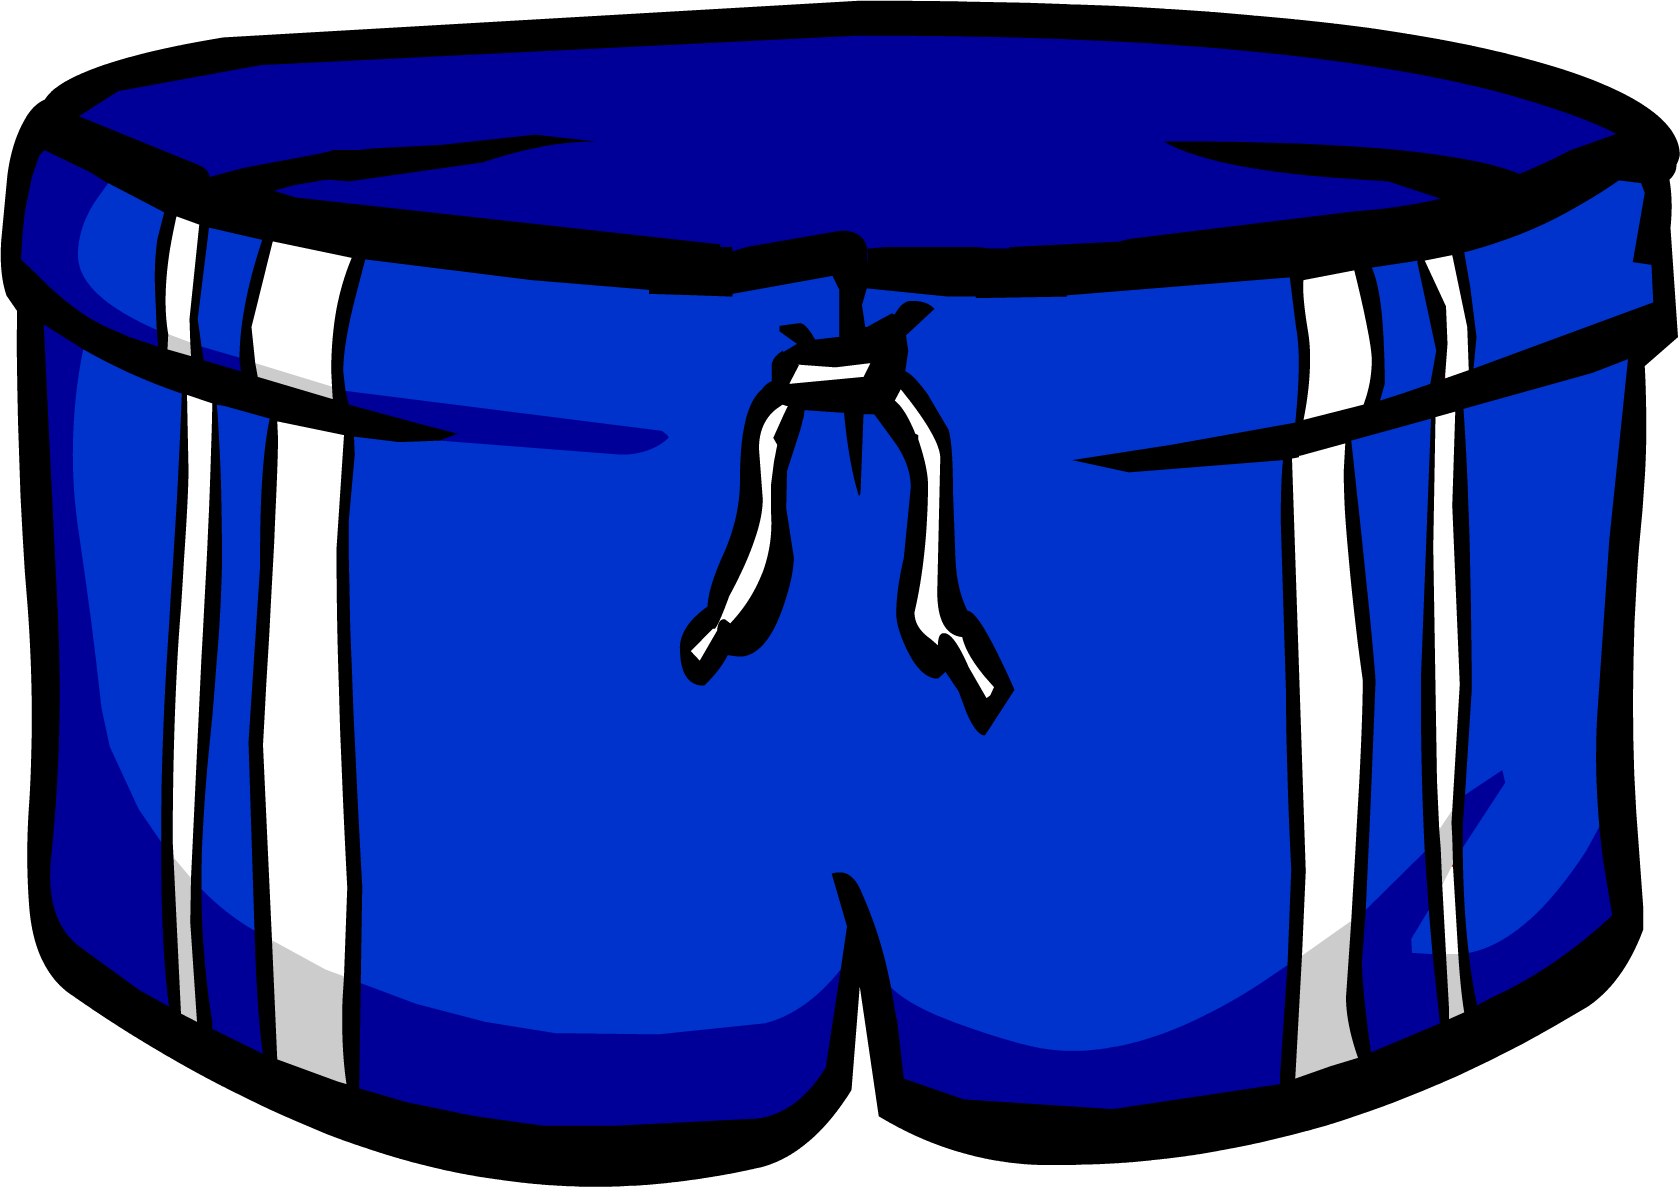 Sea Swimming Trunks Background PNG Image